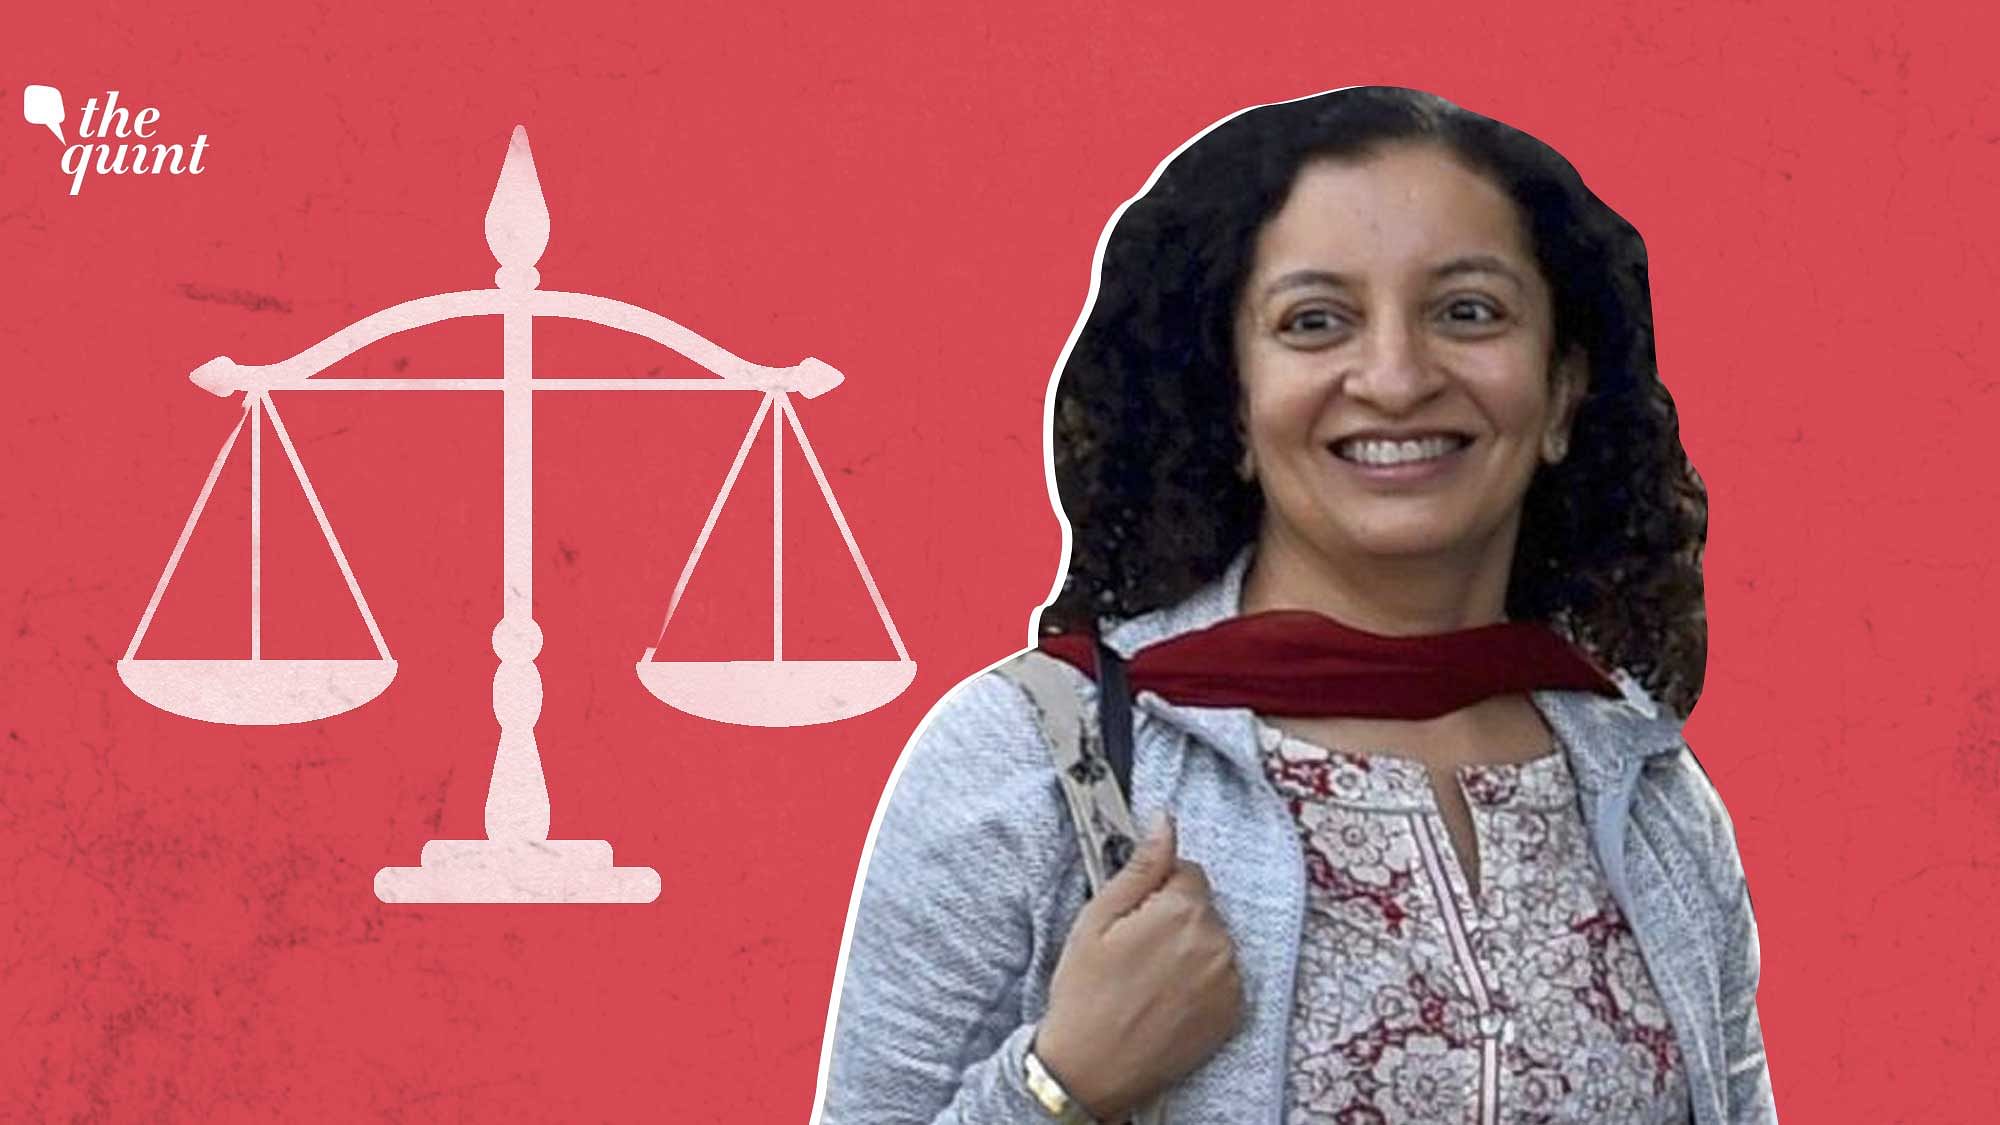 Priya Ramani was acquitted in the criminal defamation case filed against her by MJ Akbar.